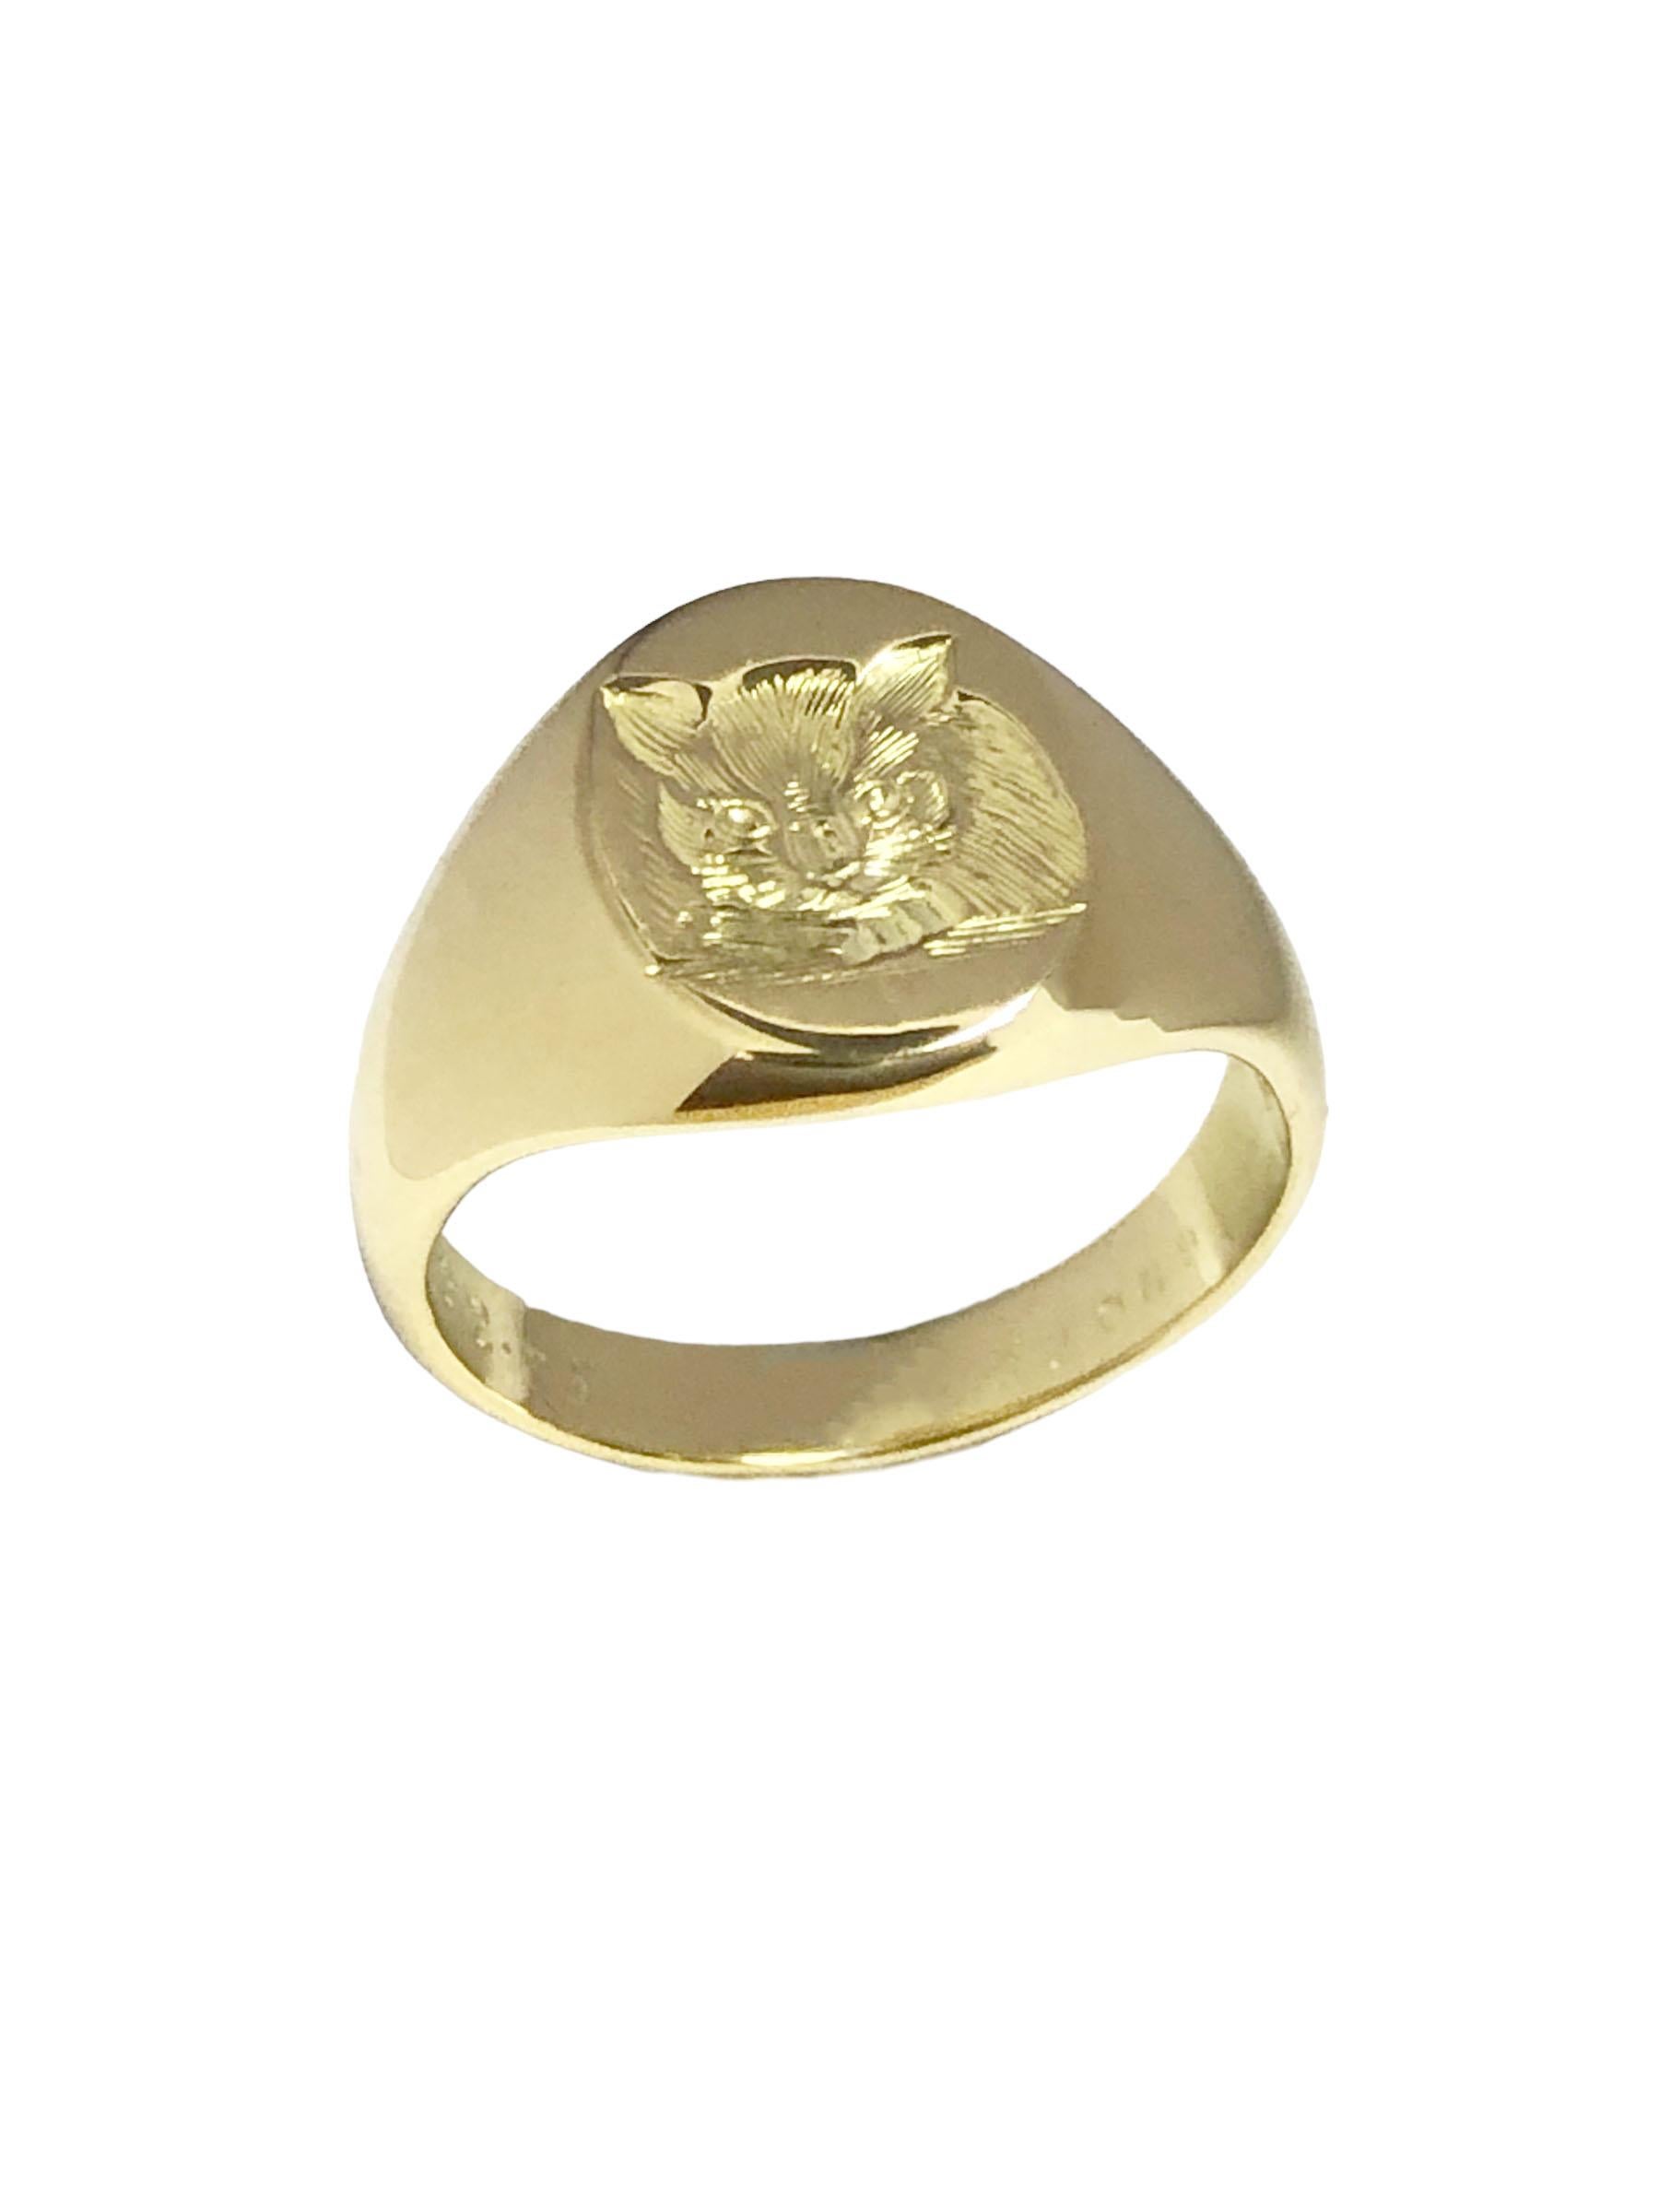 Circa 1970 Cartier 18k Yellow Gold Signet Ring the top measures 1/2 x 3/8 inch and features a deep hand chased depiction of a cat. Weighs 9.4 Grams, finger size 7 1/2, signed, numbered and comes in the original presentation box.